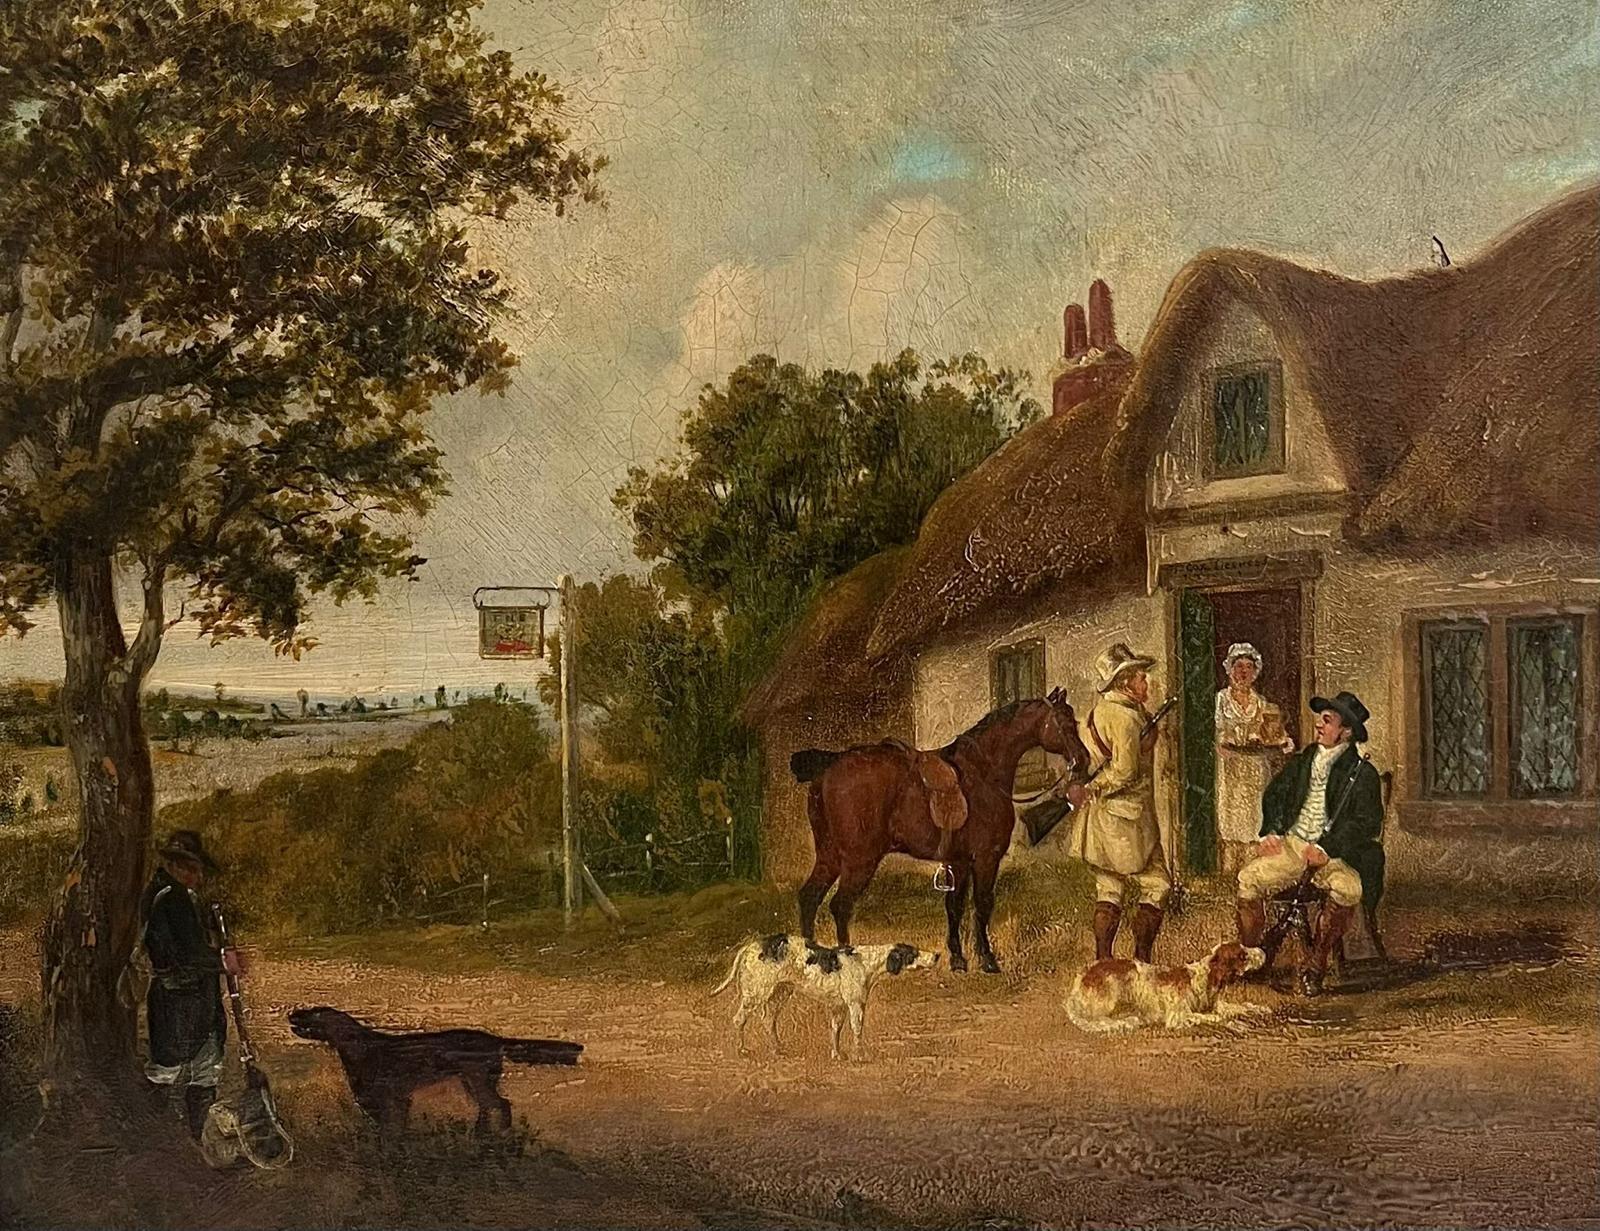 Antique English Oil Painting Gentleman Squire with Horse outside Village Tavern